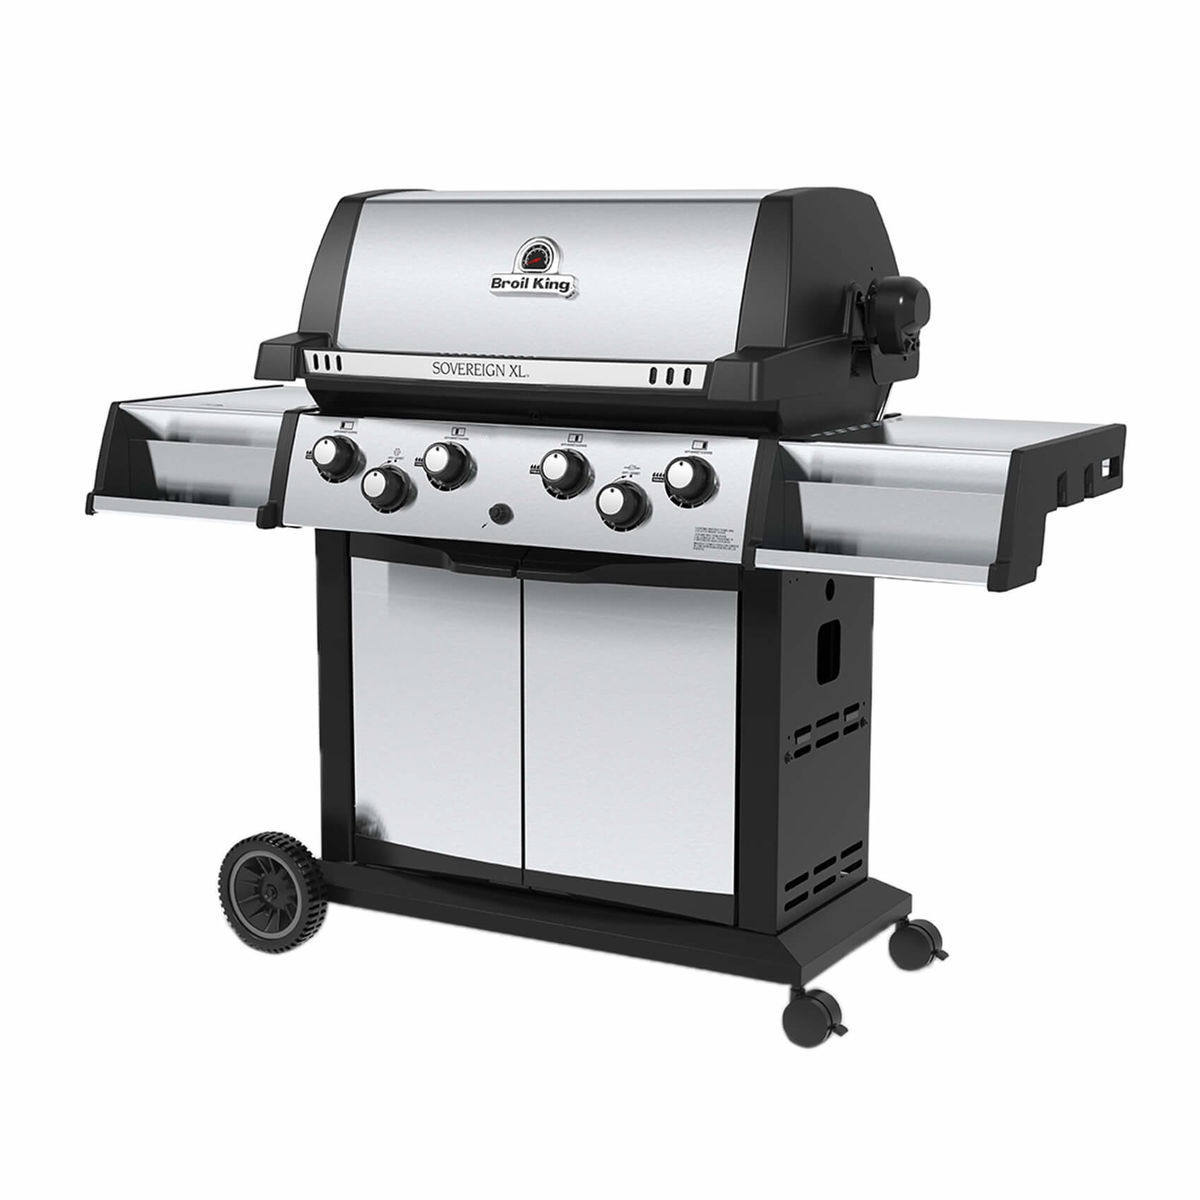 Image of Broil King Sovereign Xl90 Grill bei nettoshop.ch